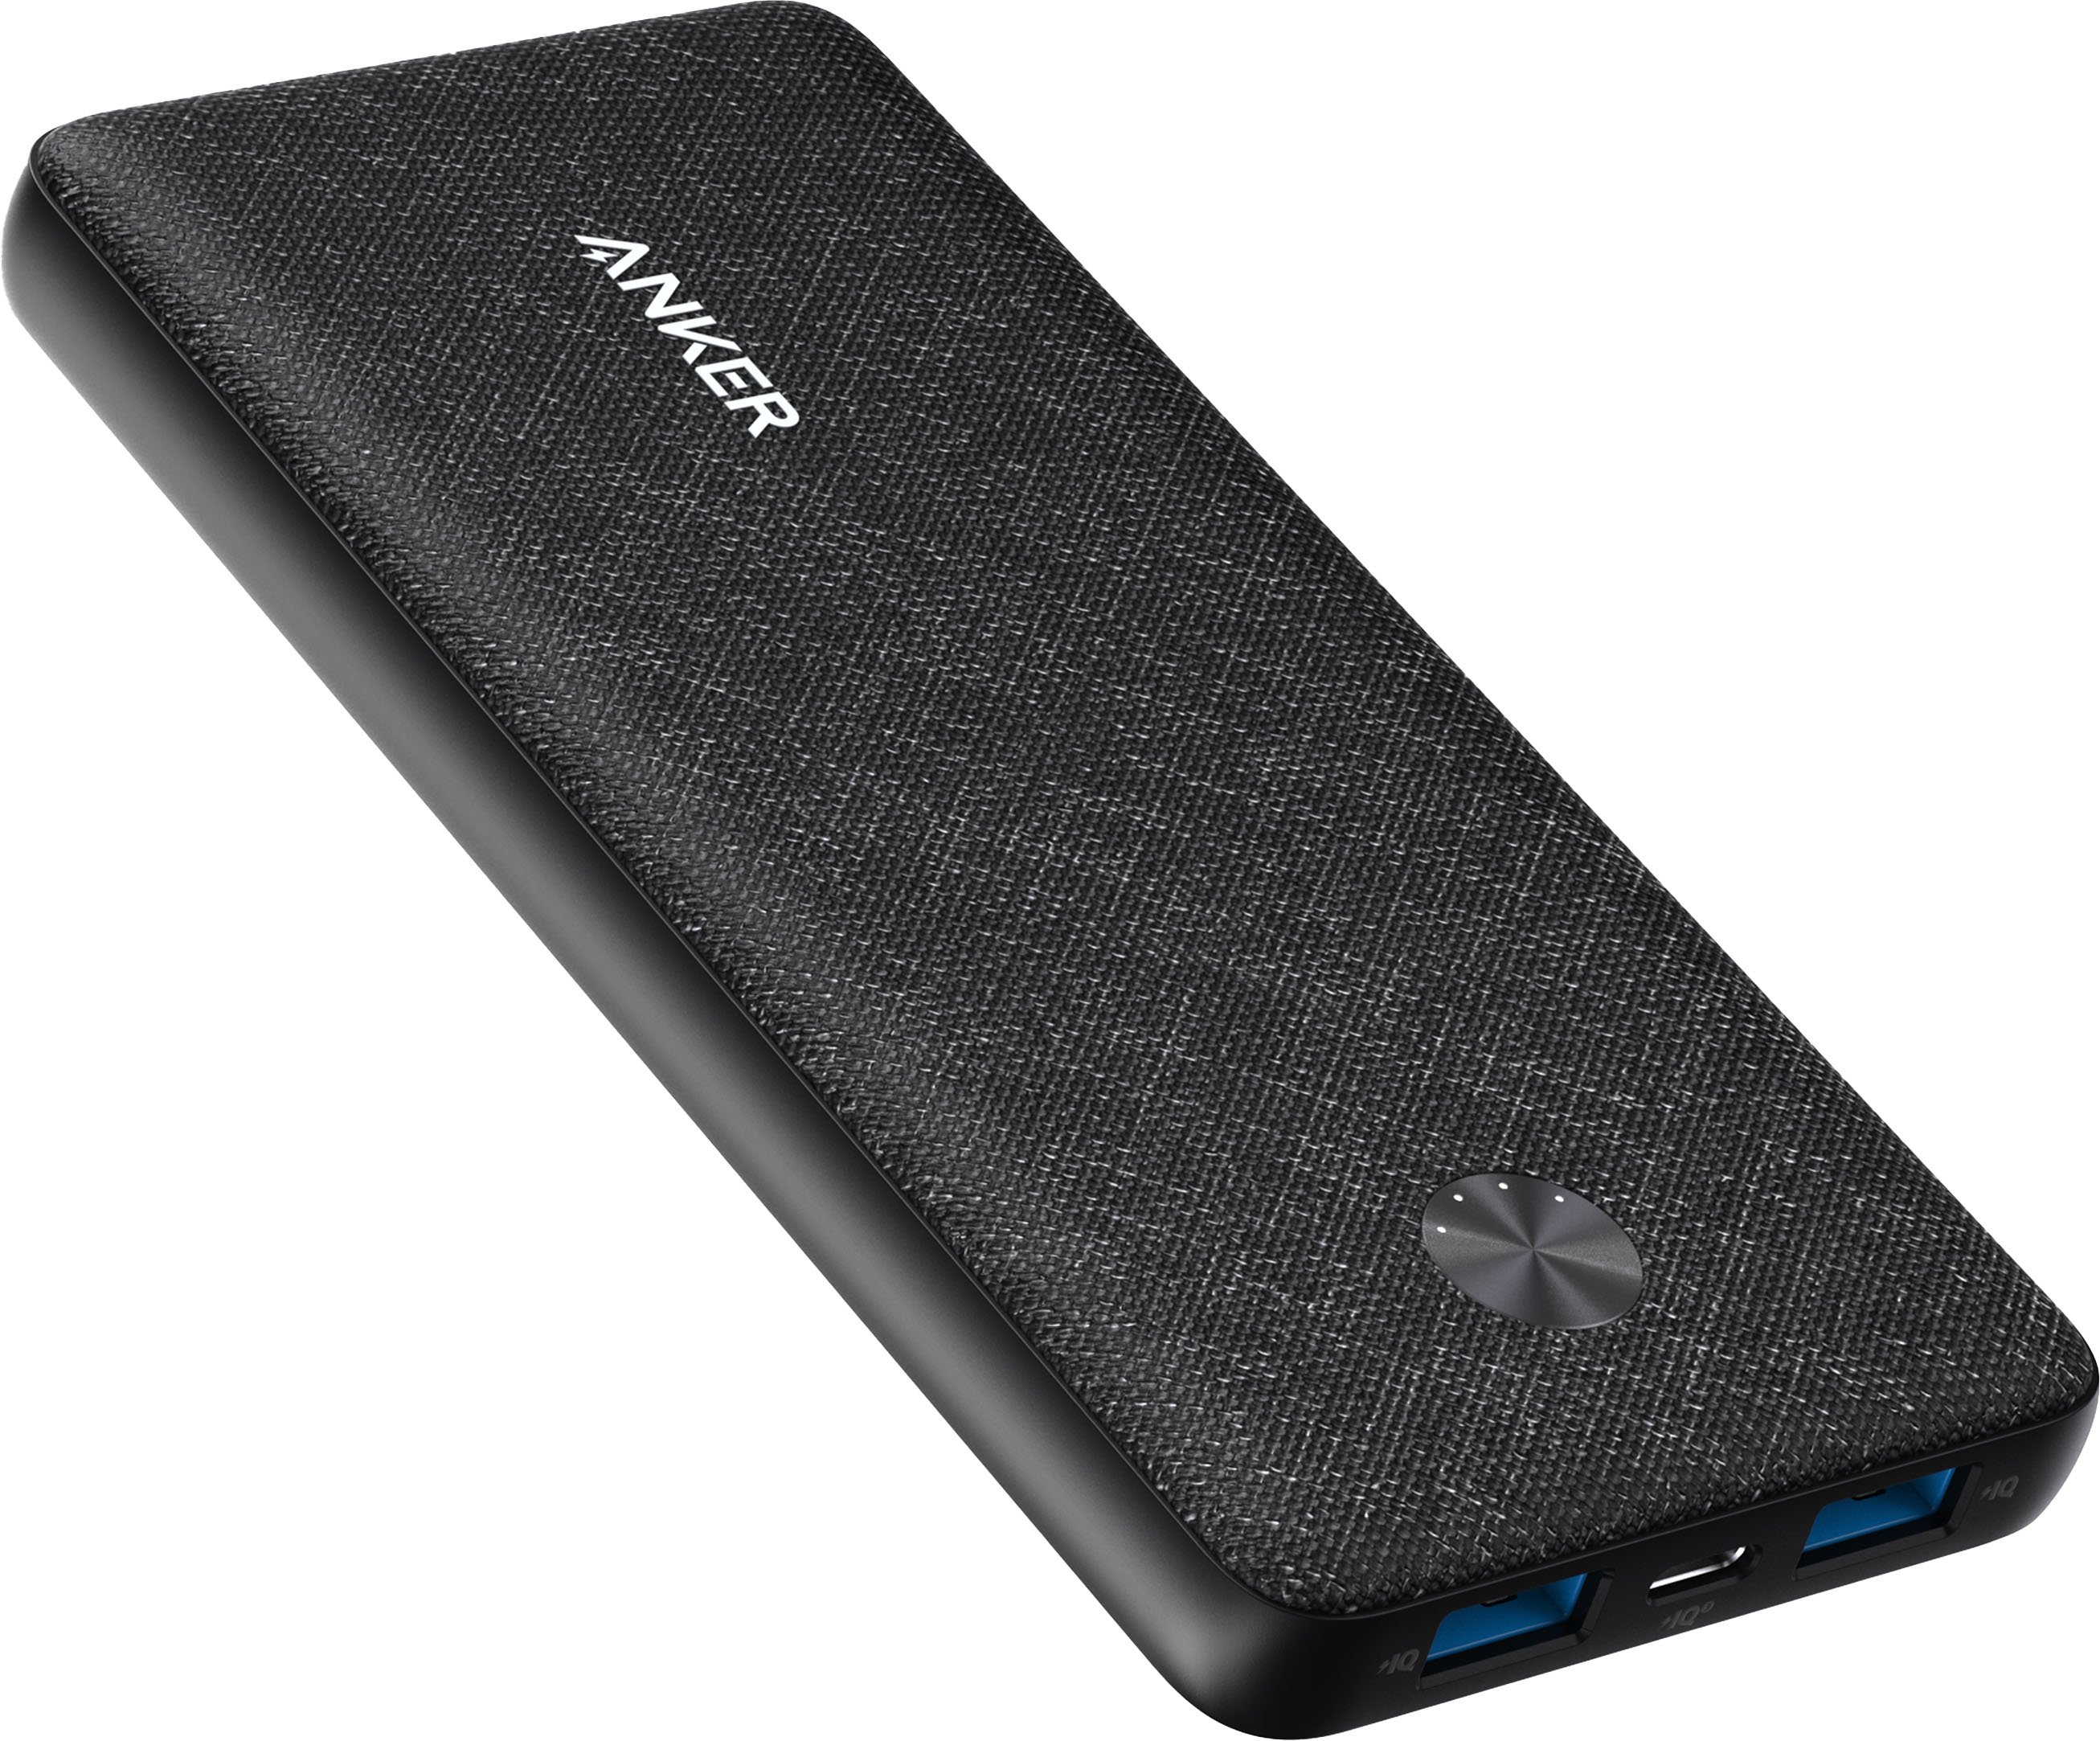 Anker Powerbanks Price, Specs, Where to Buy in Nepal - Gadgetbyte